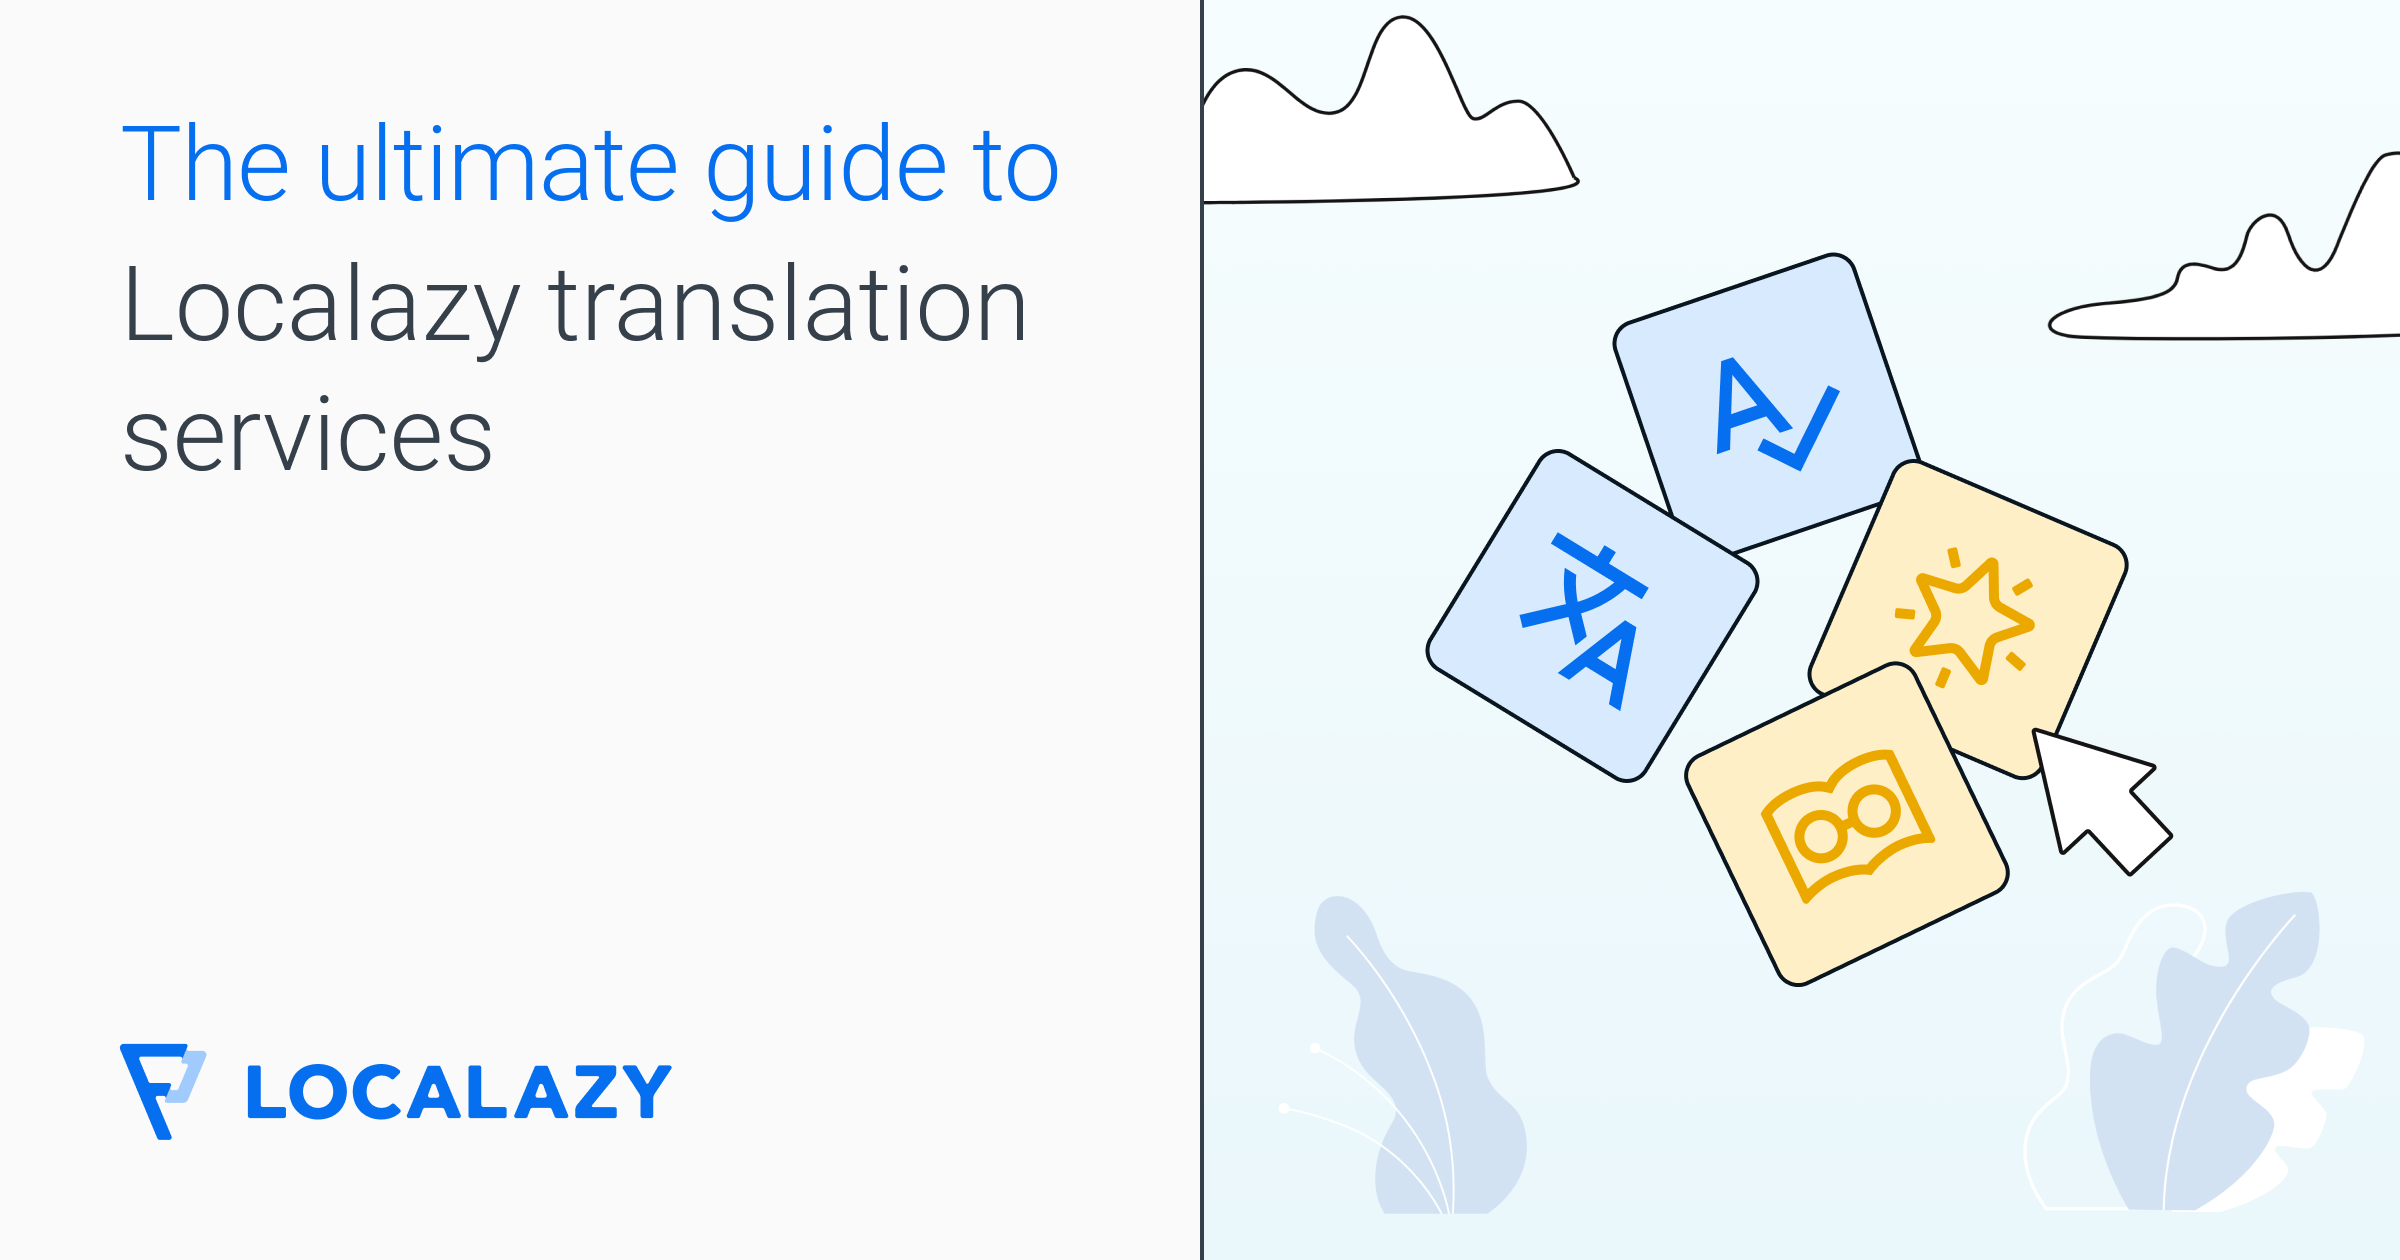 The ultimate guide to Localazy translation services